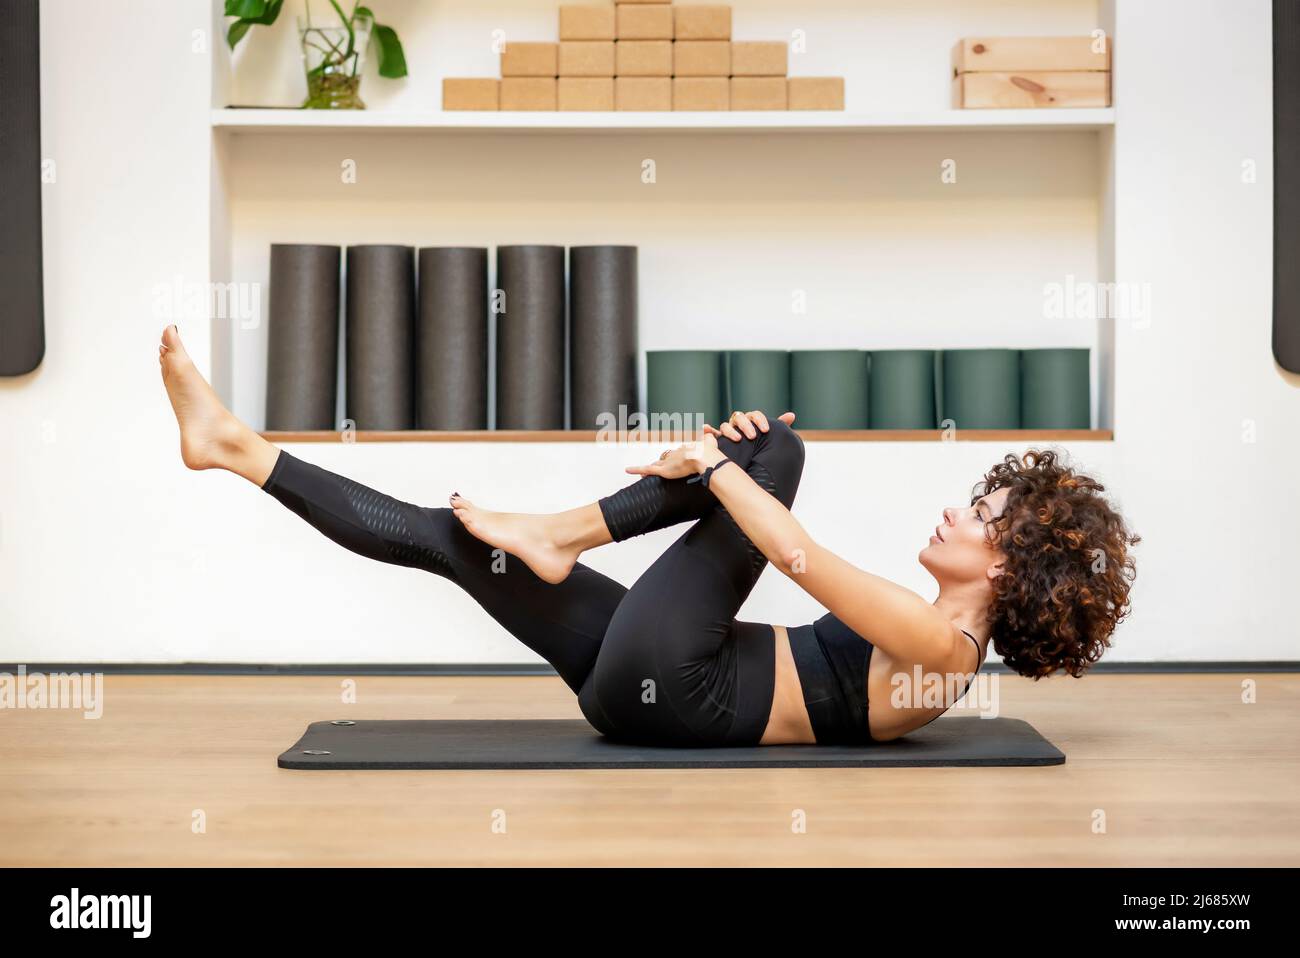 Side view of barefoot woman in sportswear with curly hair doing knee to chest exercise on floor during functional training in gym. Fitness concept. Stock Photo